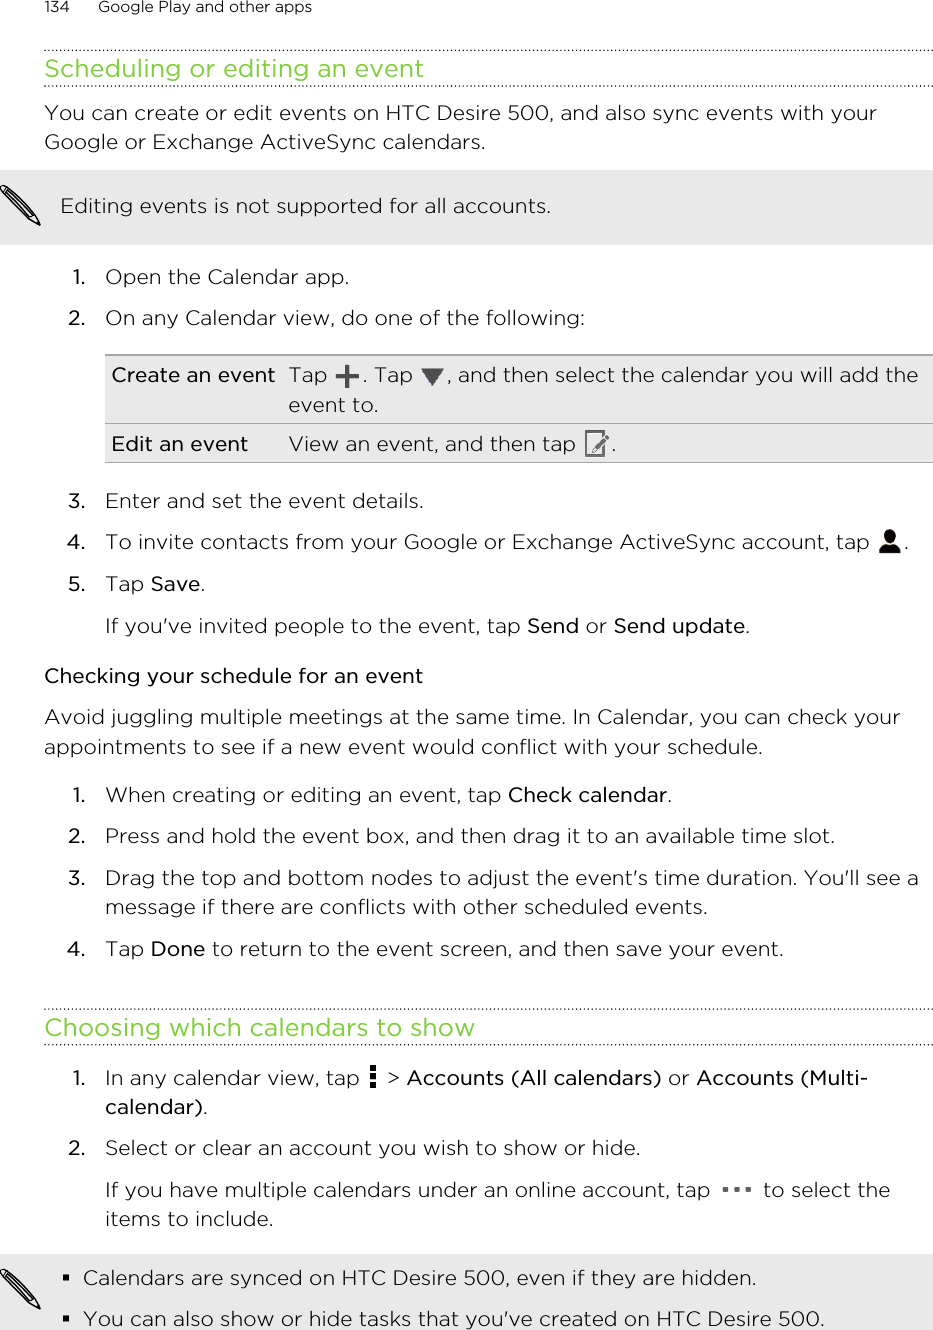 Scheduling or editing an eventYou can create or edit events on HTC Desire 500, and also sync events with yourGoogle or Exchange ActiveSync calendars.Editing events is not supported for all accounts.1. Open the Calendar app.2. On any Calendar view, do one of the following:Create an event Tap  . Tap  , and then select the calendar you will add theevent to.Edit an event View an event, and then tap  .3. Enter and set the event details.4. To invite contacts from your Google or Exchange ActiveSync account, tap  .5. Tap Save. If you&apos;ve invited people to the event, tap Send or Send update.Checking your schedule for an eventAvoid juggling multiple meetings at the same time. In Calendar, you can check yourappointments to see if a new event would conflict with your schedule.1. When creating or editing an event, tap Check calendar.2. Press and hold the event box, and then drag it to an available time slot.3. Drag the top and bottom nodes to adjust the event&apos;s time duration. You&apos;ll see amessage if there are conflicts with other scheduled events.4. Tap Done to return to the event screen, and then save your event.Choosing which calendars to show1. In any calendar view, tap   &gt; Accounts (All calendars) or Accounts (Multi-calendar).2. Select or clear an account you wish to show or hide. If you have multiple calendars under an online account, tap   to select theitems to include.§Calendars are synced on HTC Desire 500, even if they are hidden.§You can also show or hide tasks that you&apos;ve created on HTC Desire 500.134 Google Play and other apps